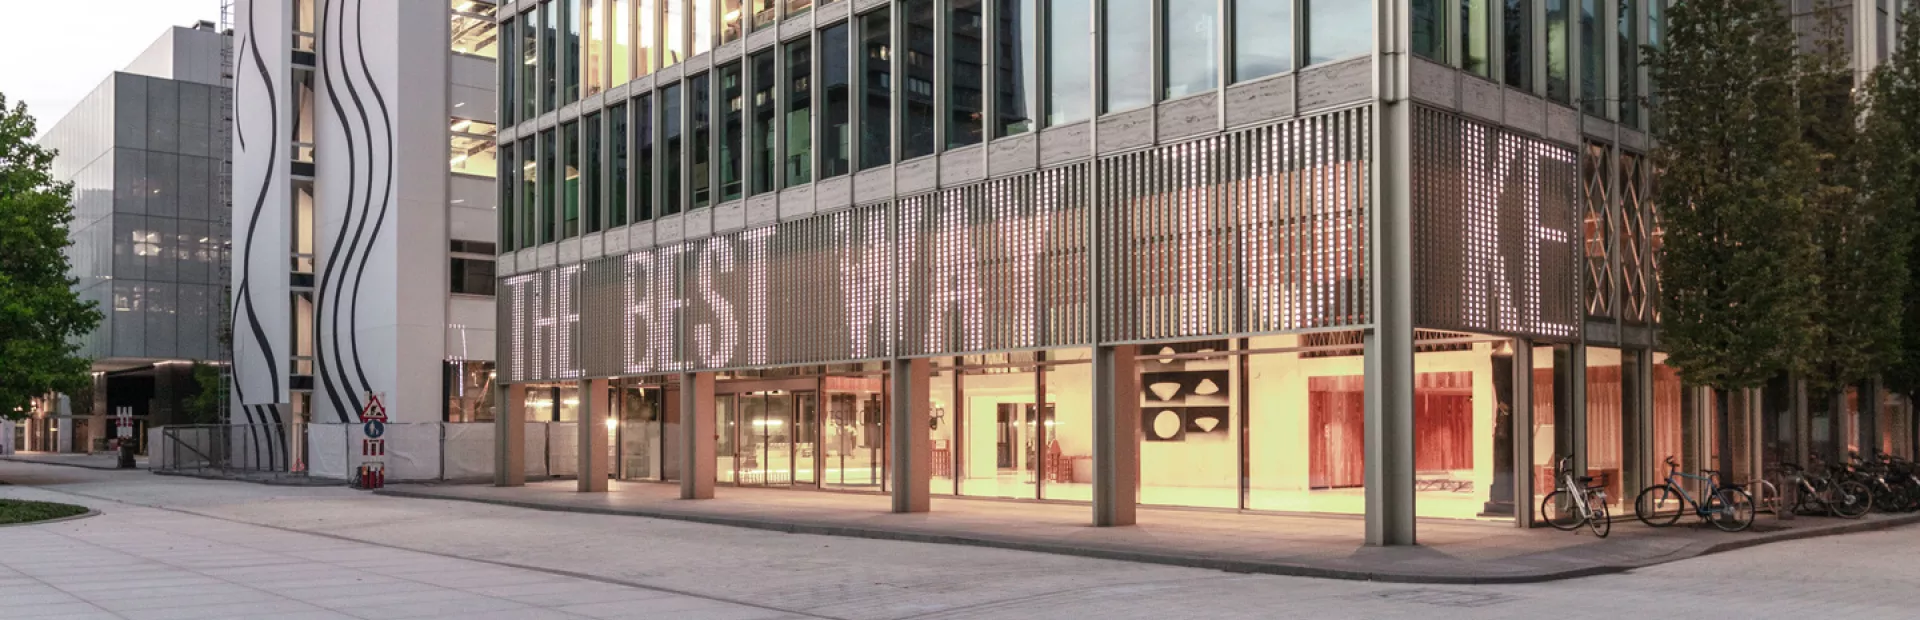 A building with LED artwork, displaying a typographic message, built into the frontage